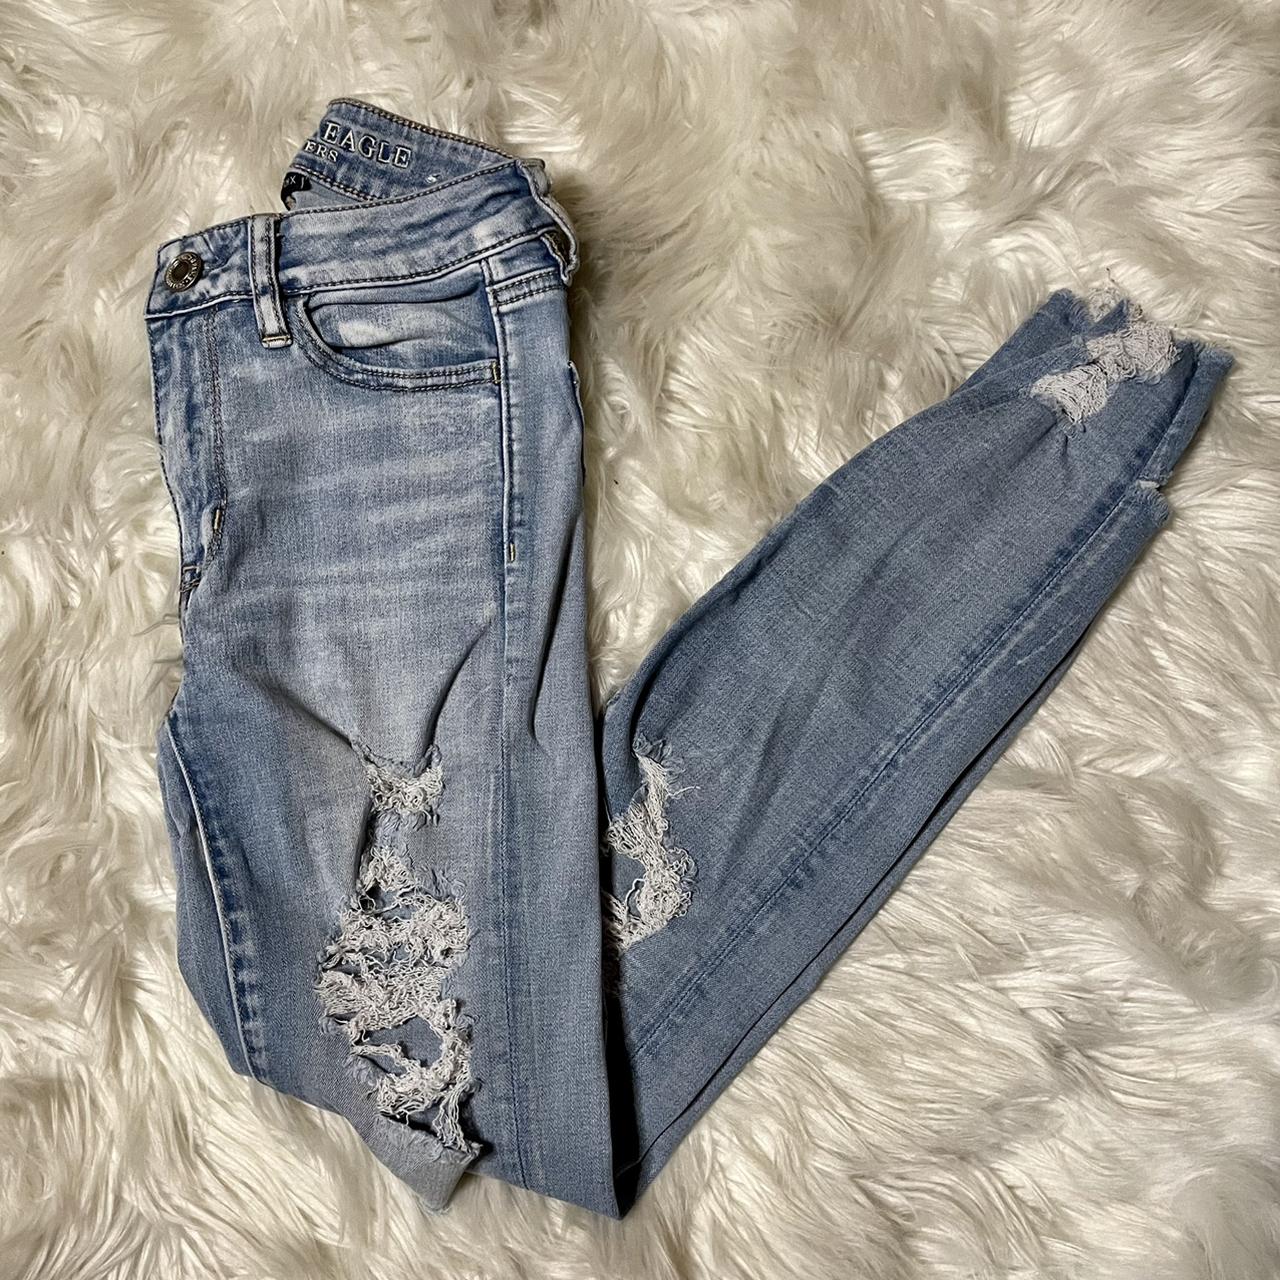 American Eagle Jeggings High waisted, distressed - Depop